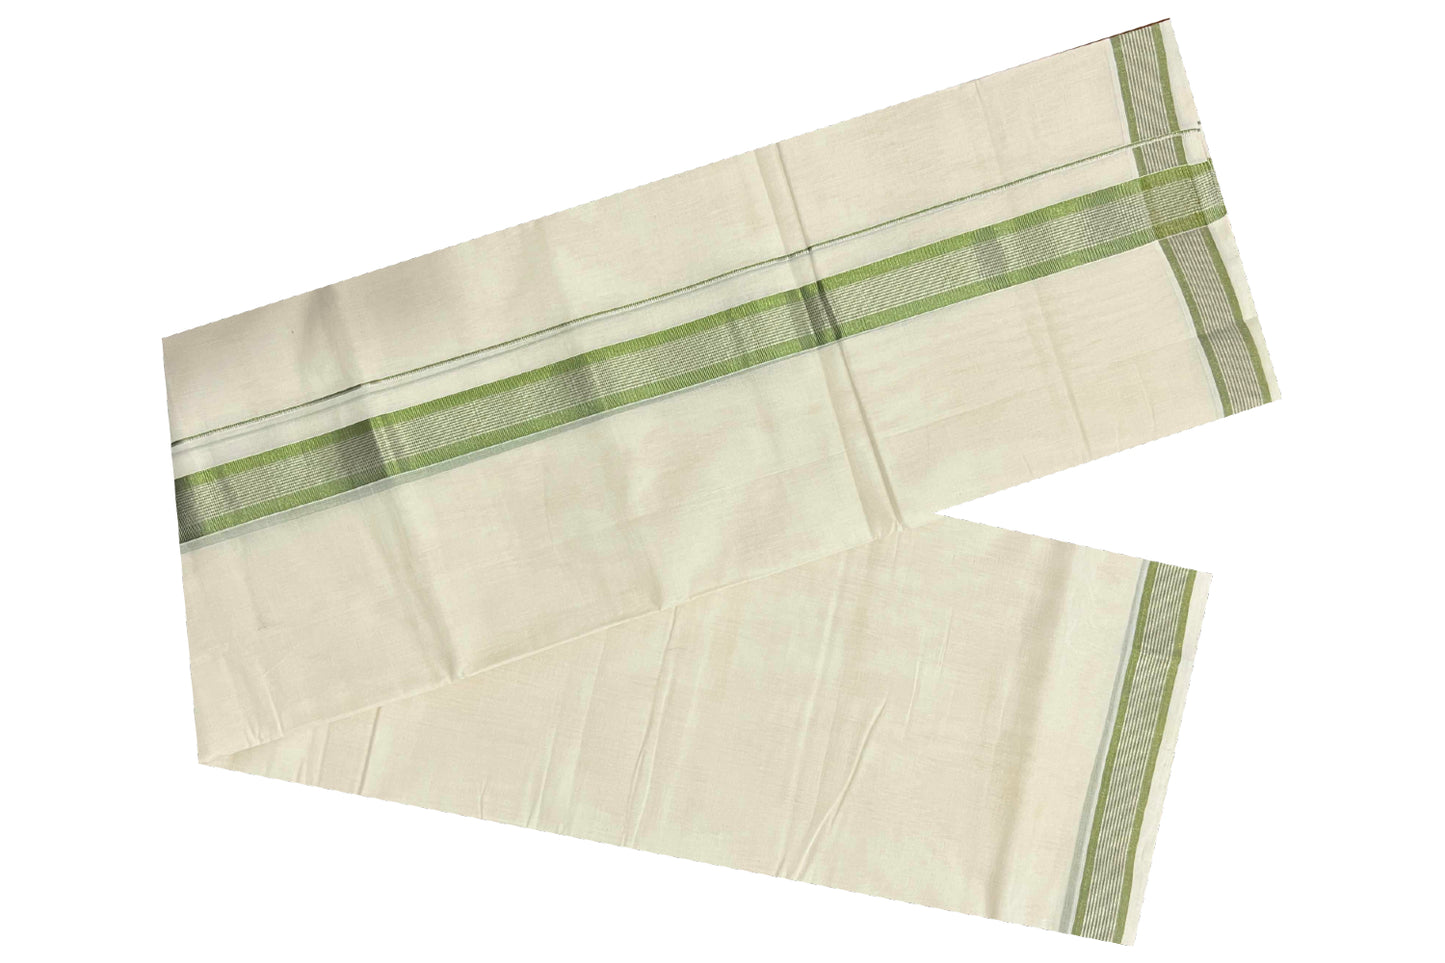 Southloom Kuthampully Pure Cotton Handloom Mundu with Silver and Green Kasavu Lines Border